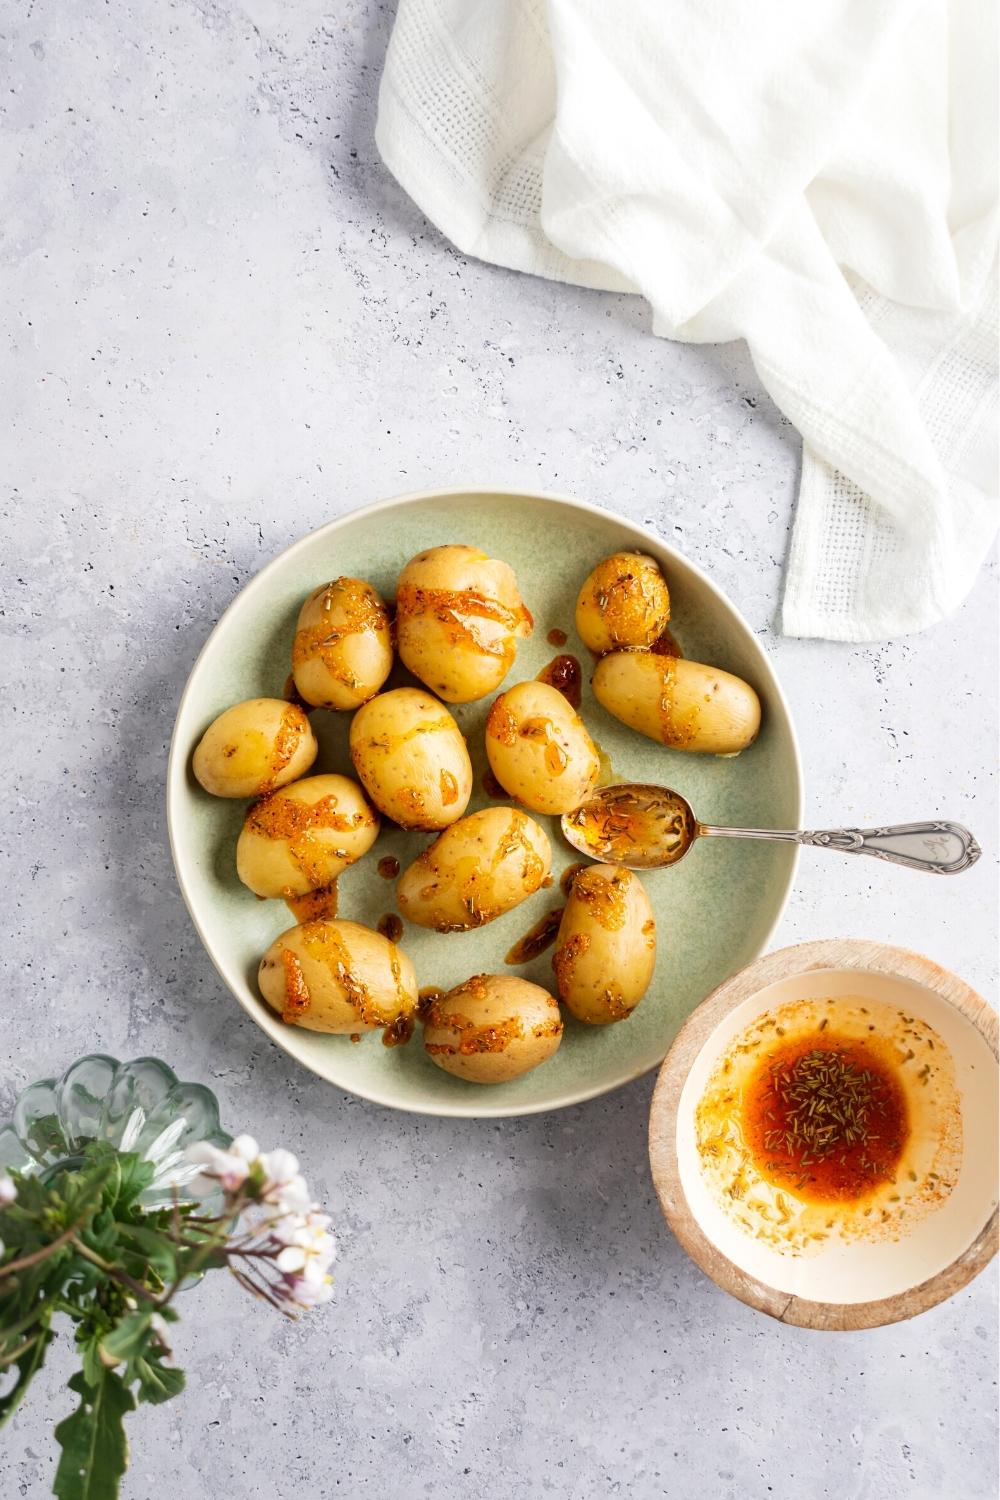 Baby potatoes with seasoning drizzled on them on top of a plate with a spoon on it. Next to the plate is a bowl with the seasoning mixture in it.